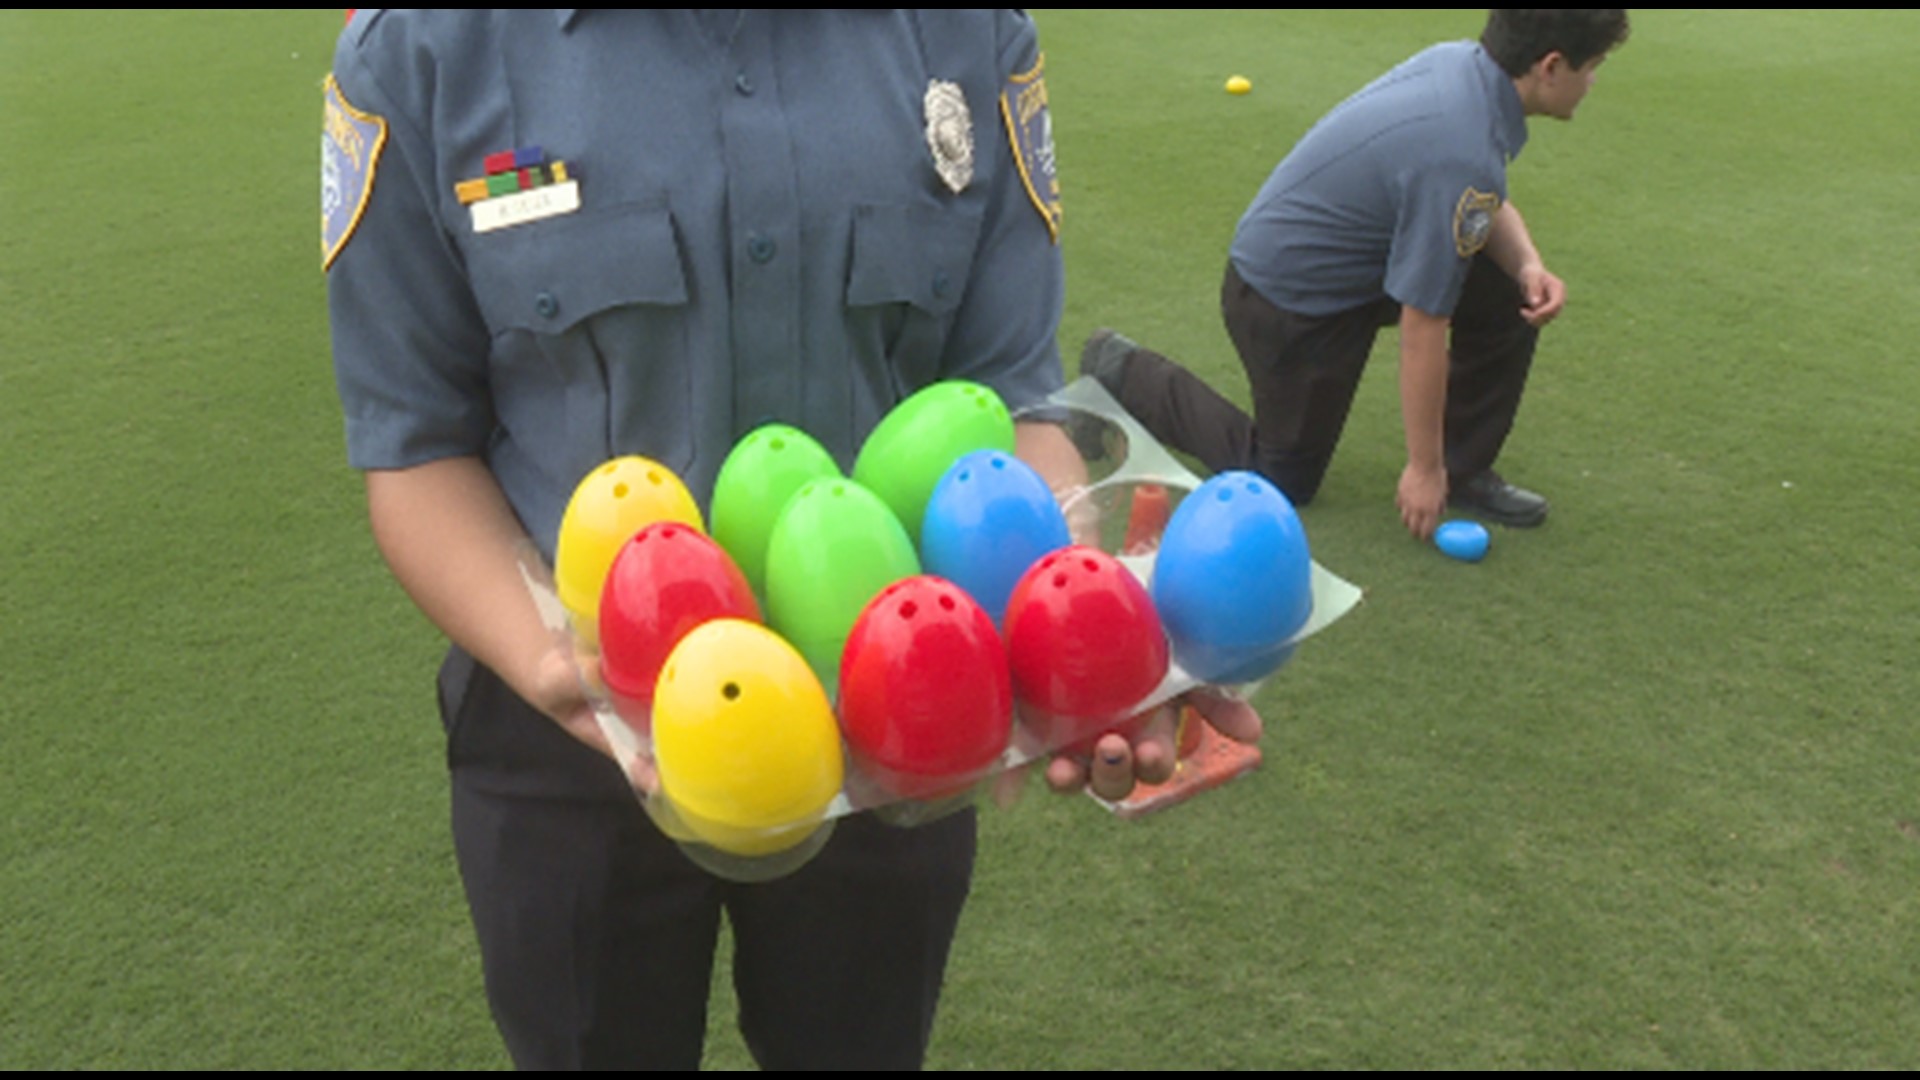 The non-profit relies on community support to continue it's Easter tradition.